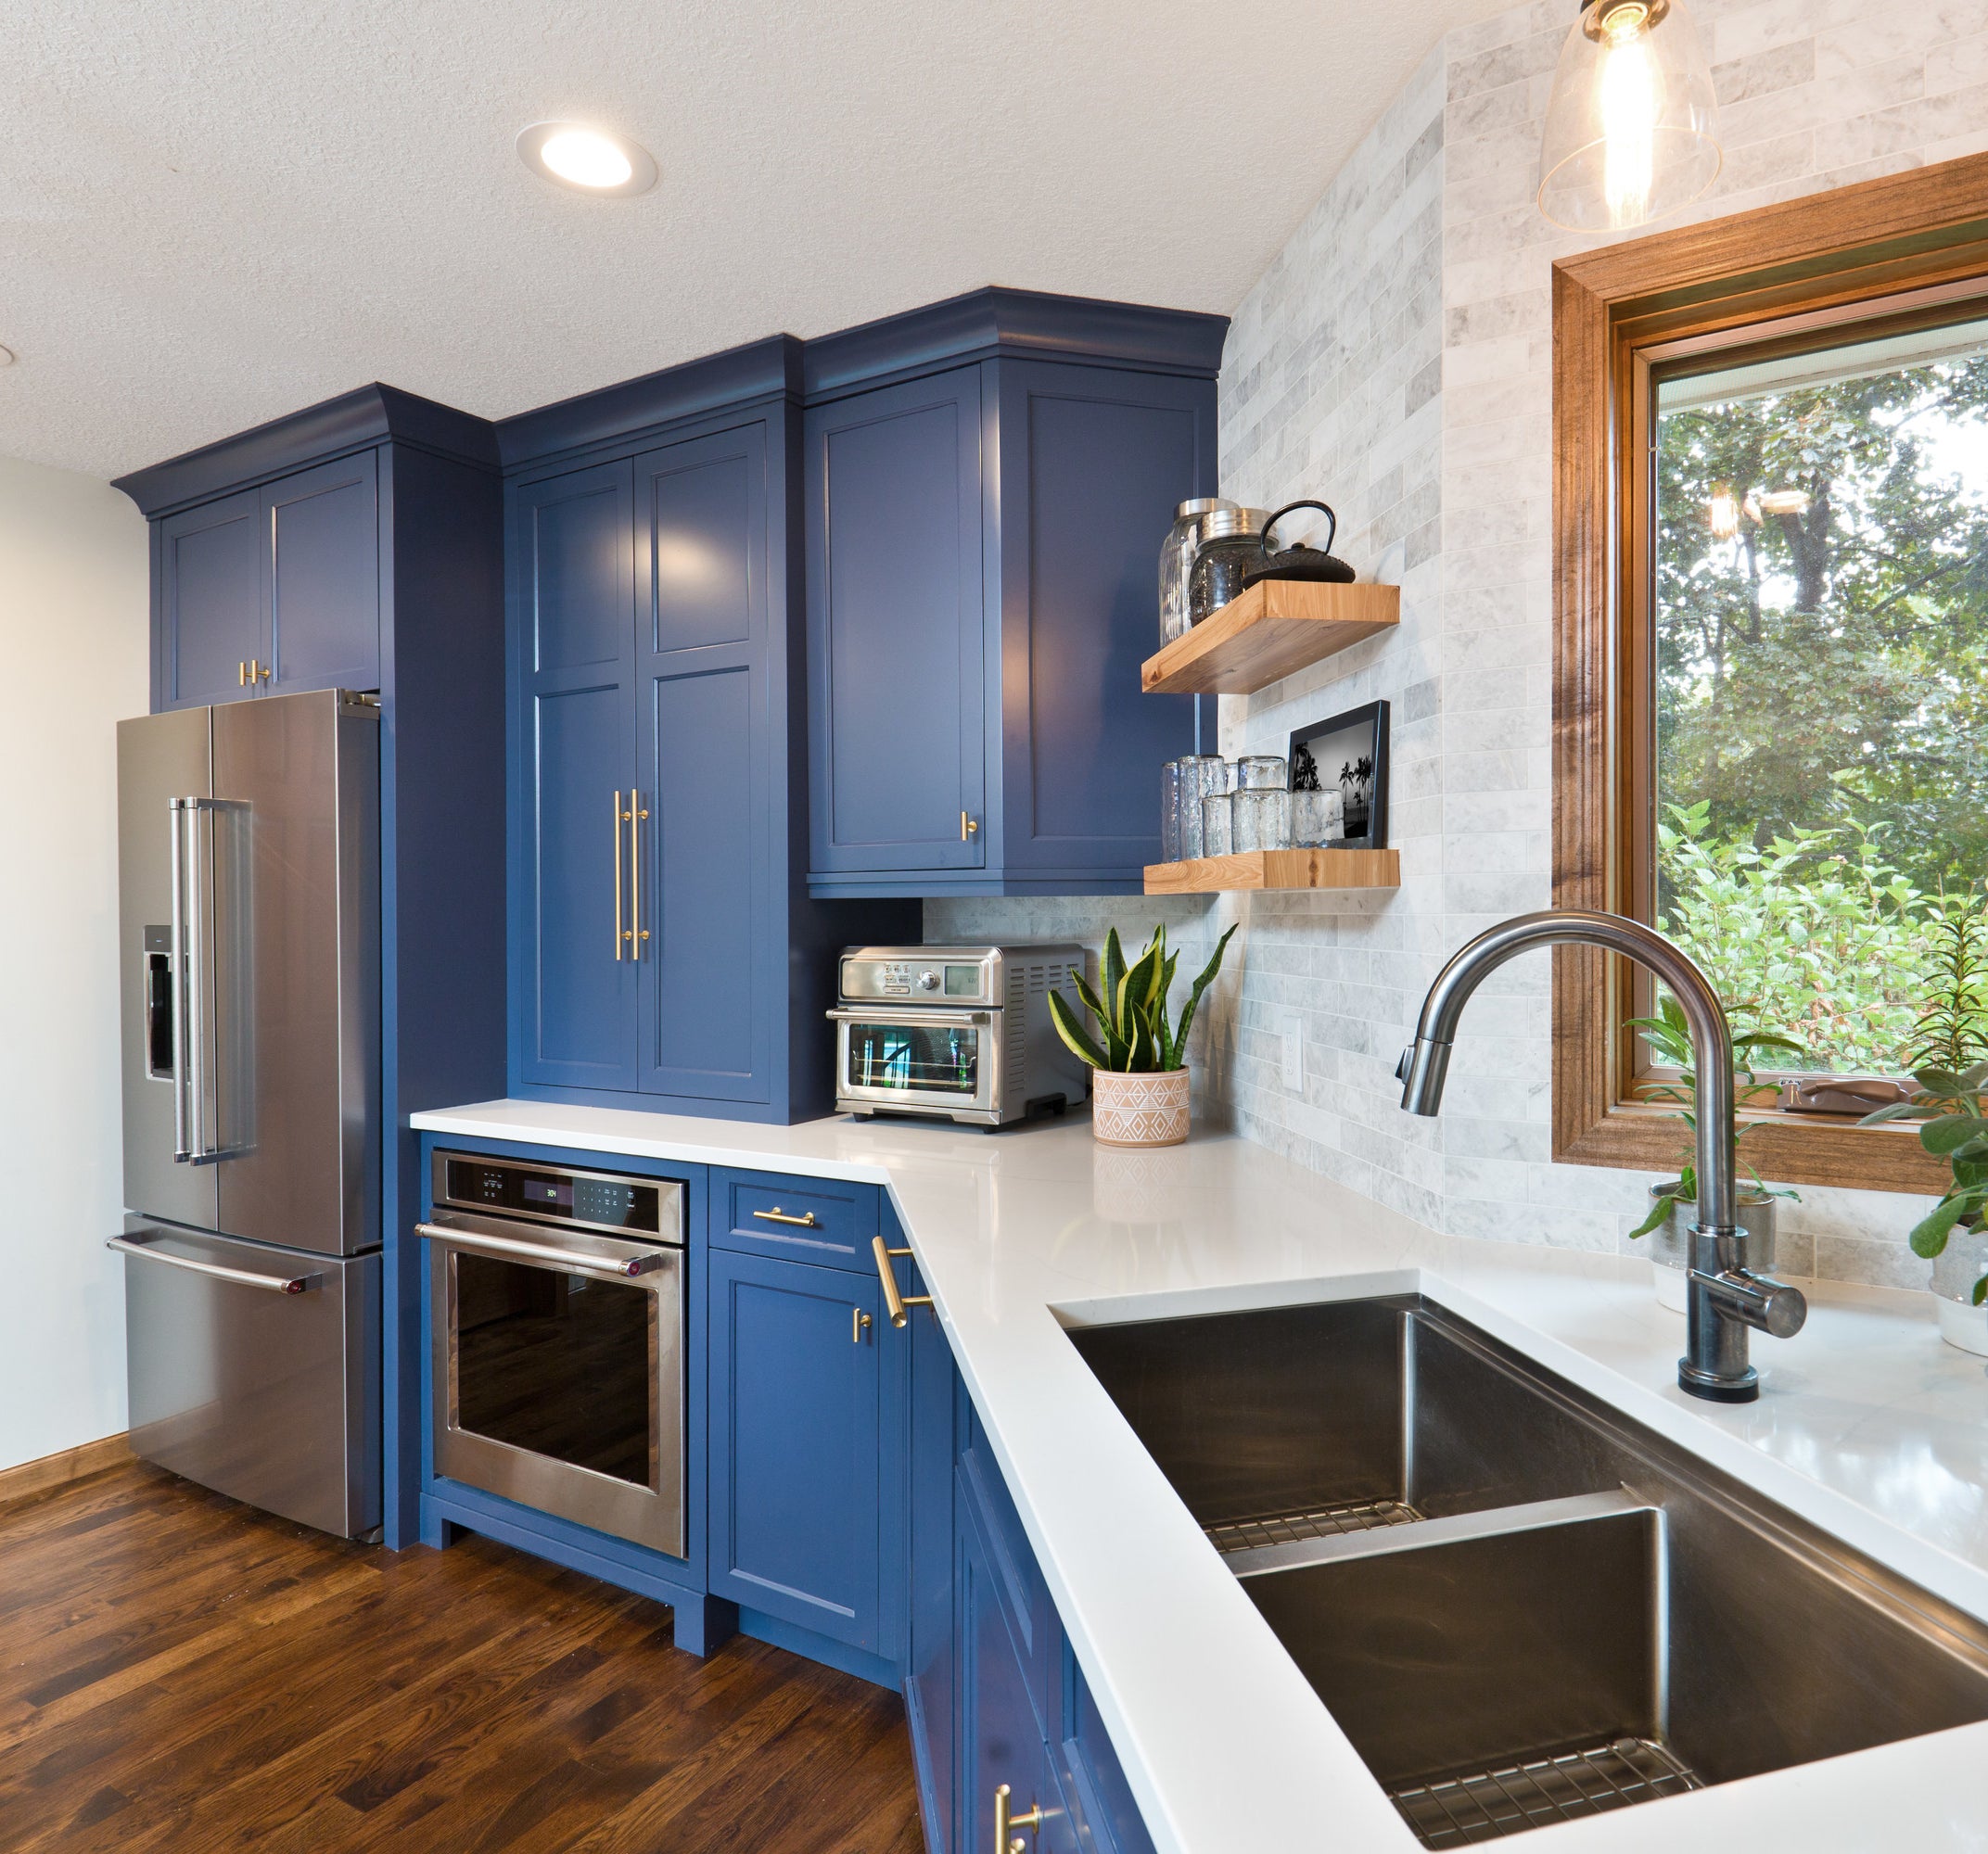 Kitchen with dark blue cabinets and wooden window accents